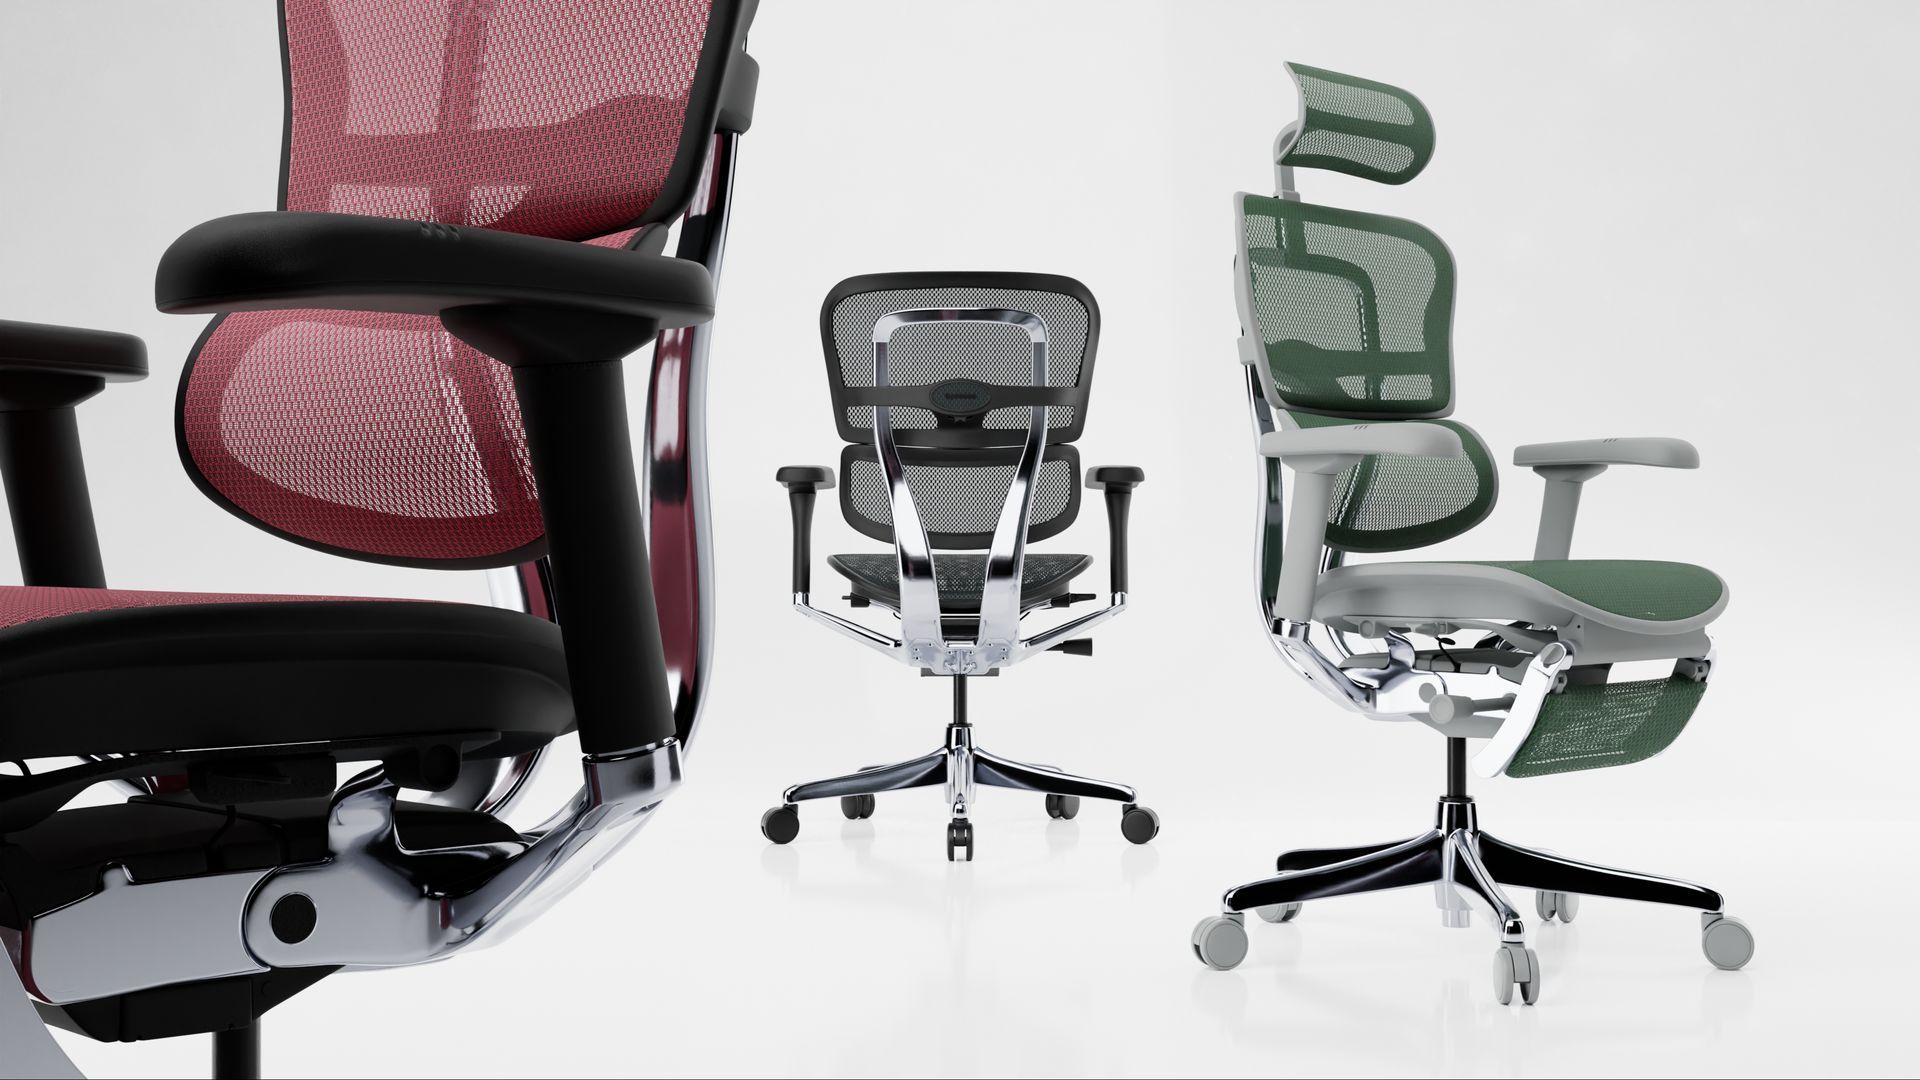 3 ergonomic mesh office chairs in a white space in colours red, black and green